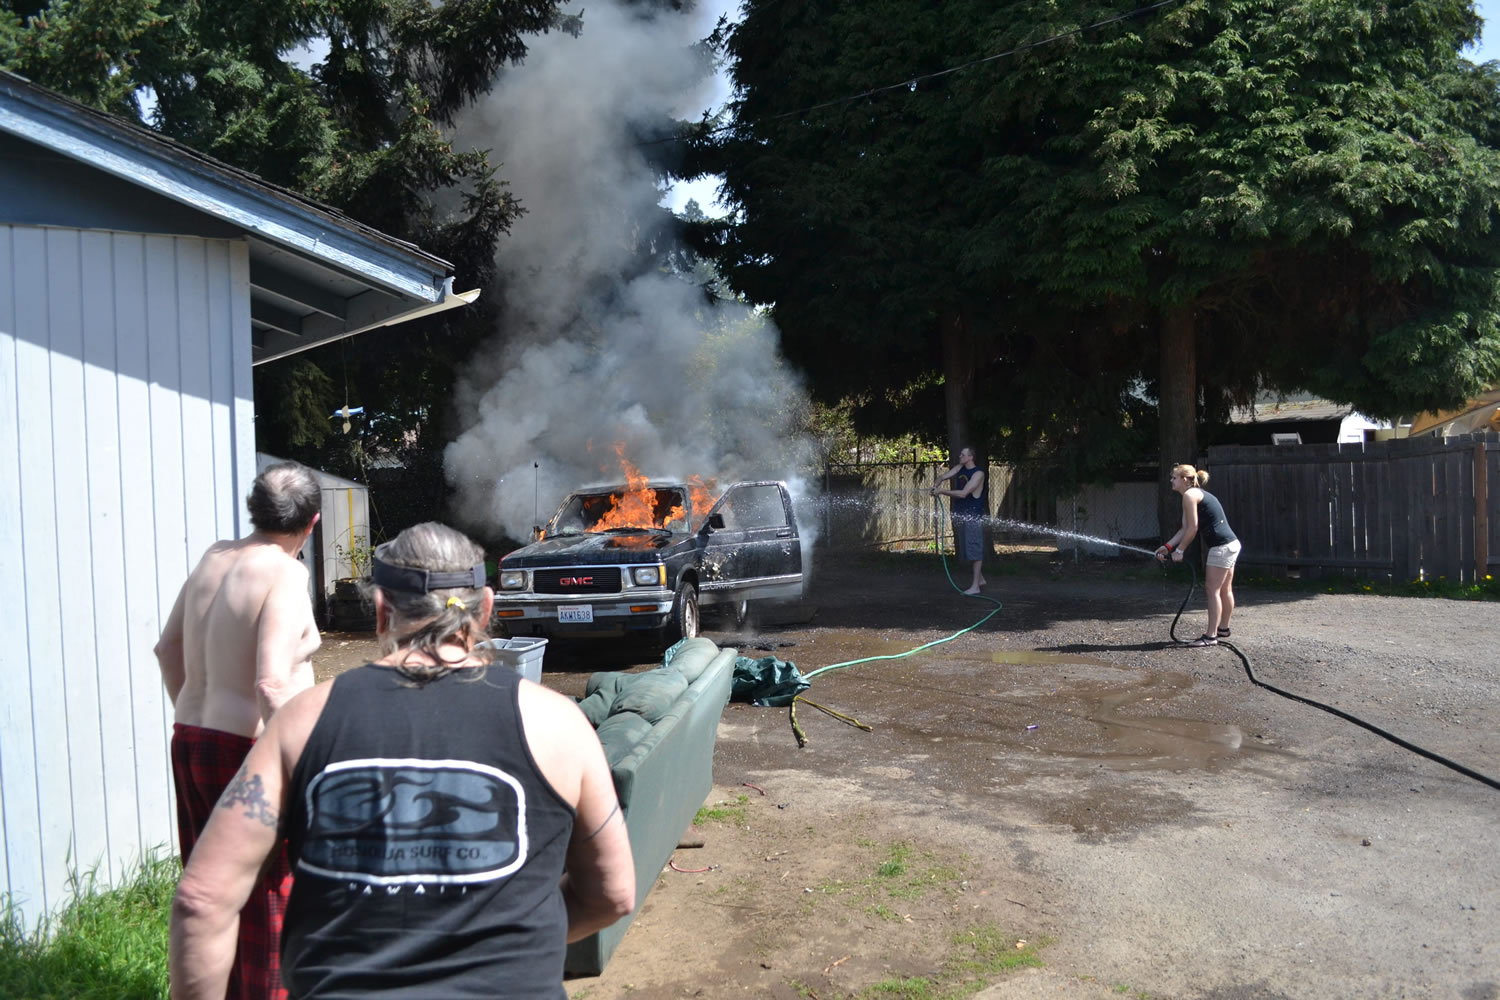 Local residents work to put out the fire that destroyed a vehicle on Thursday, April 25 near East 36th Street and O Street in Vancouver.